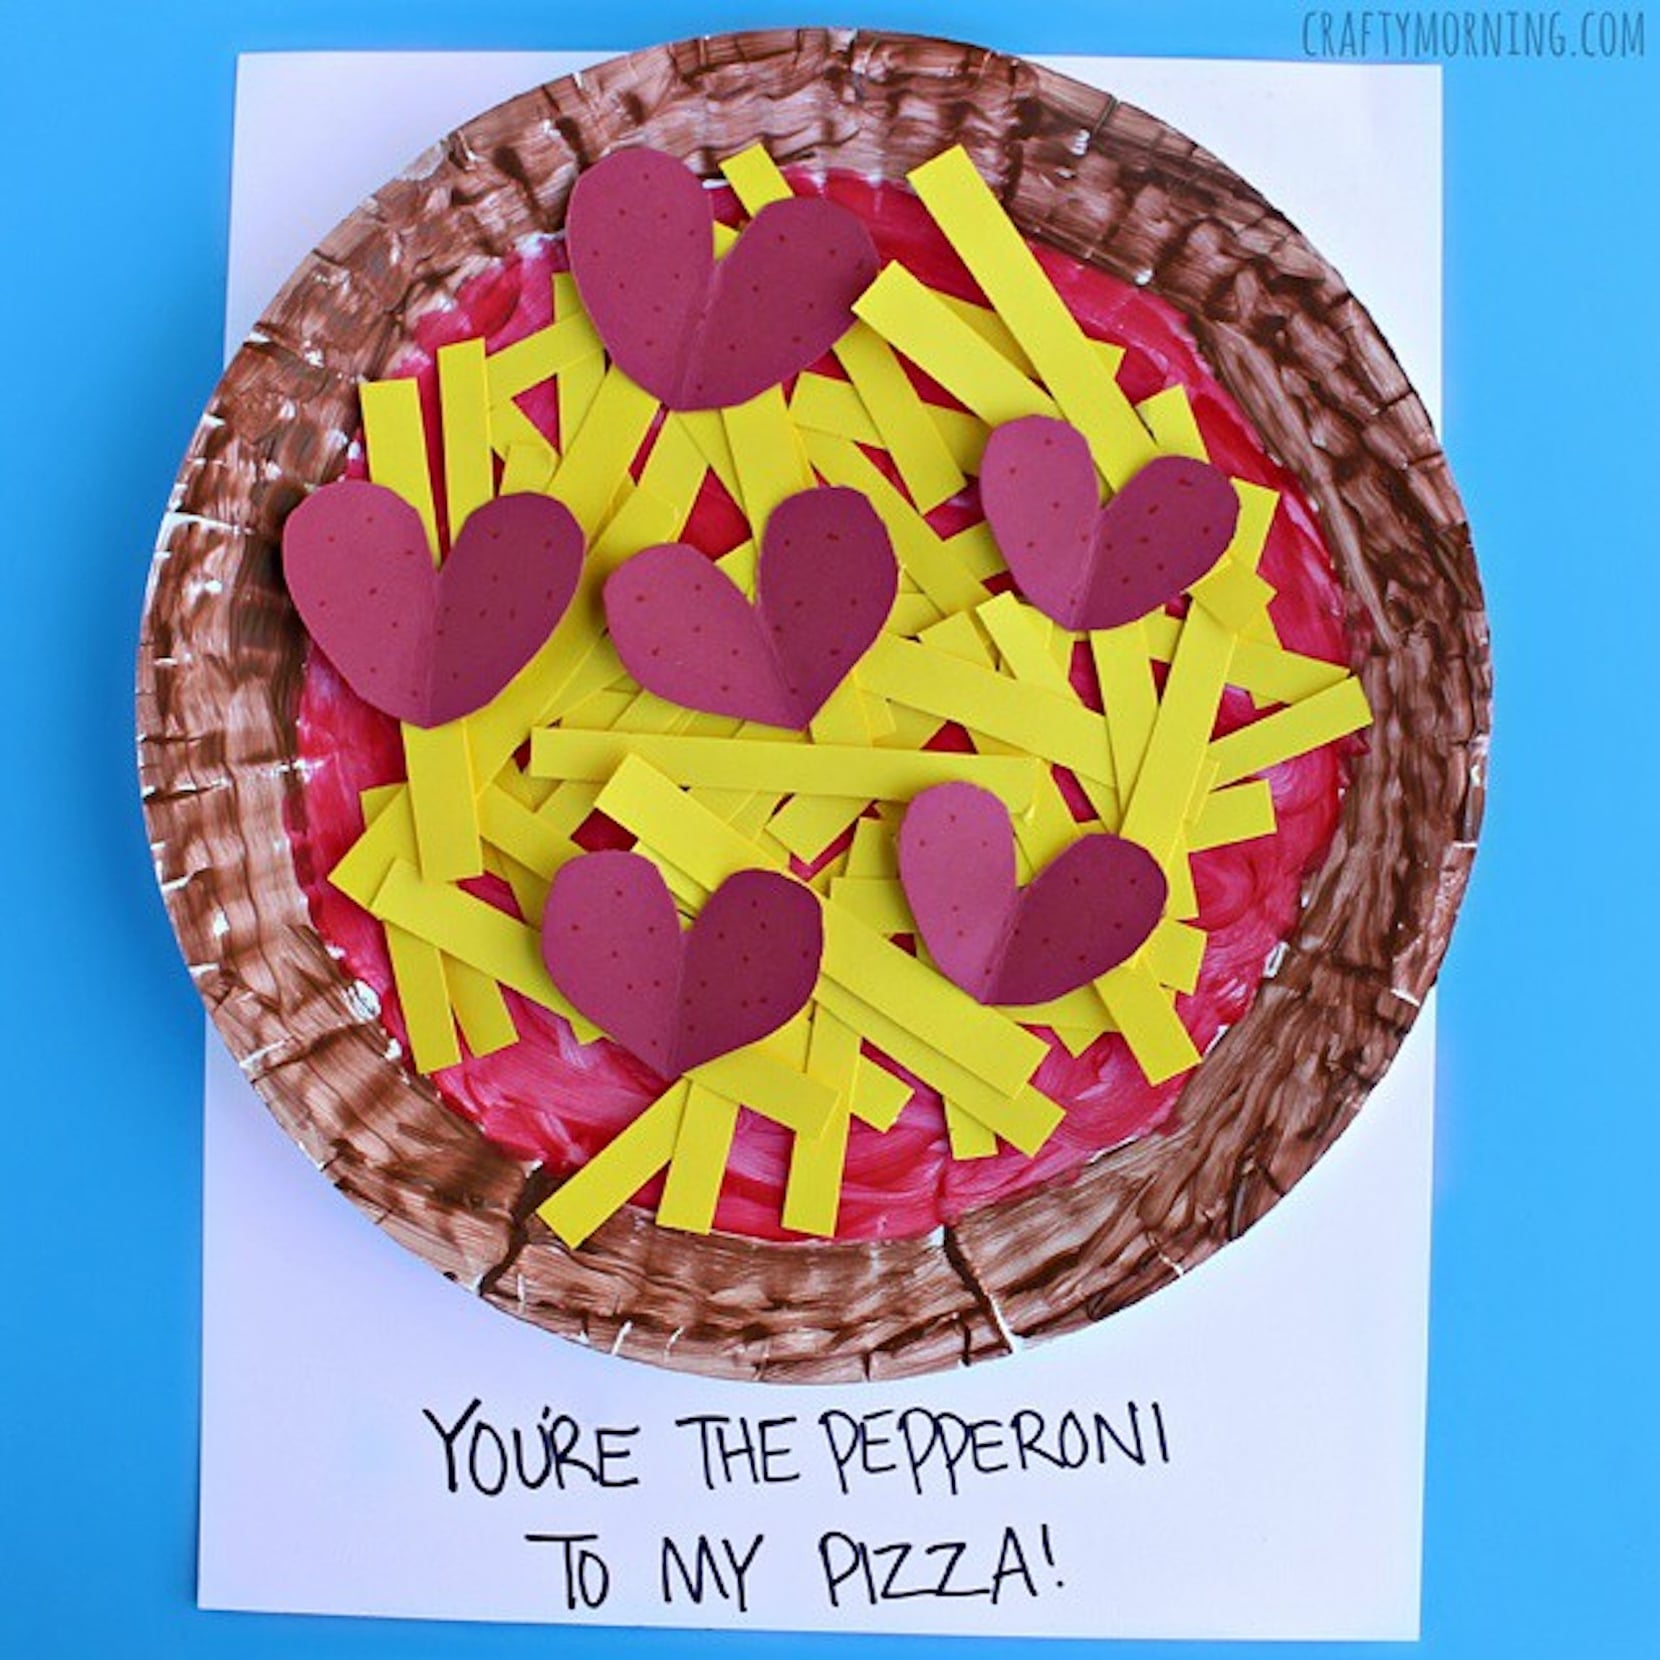 Easy Valentine's Day Craft - No Time For Flash Cards